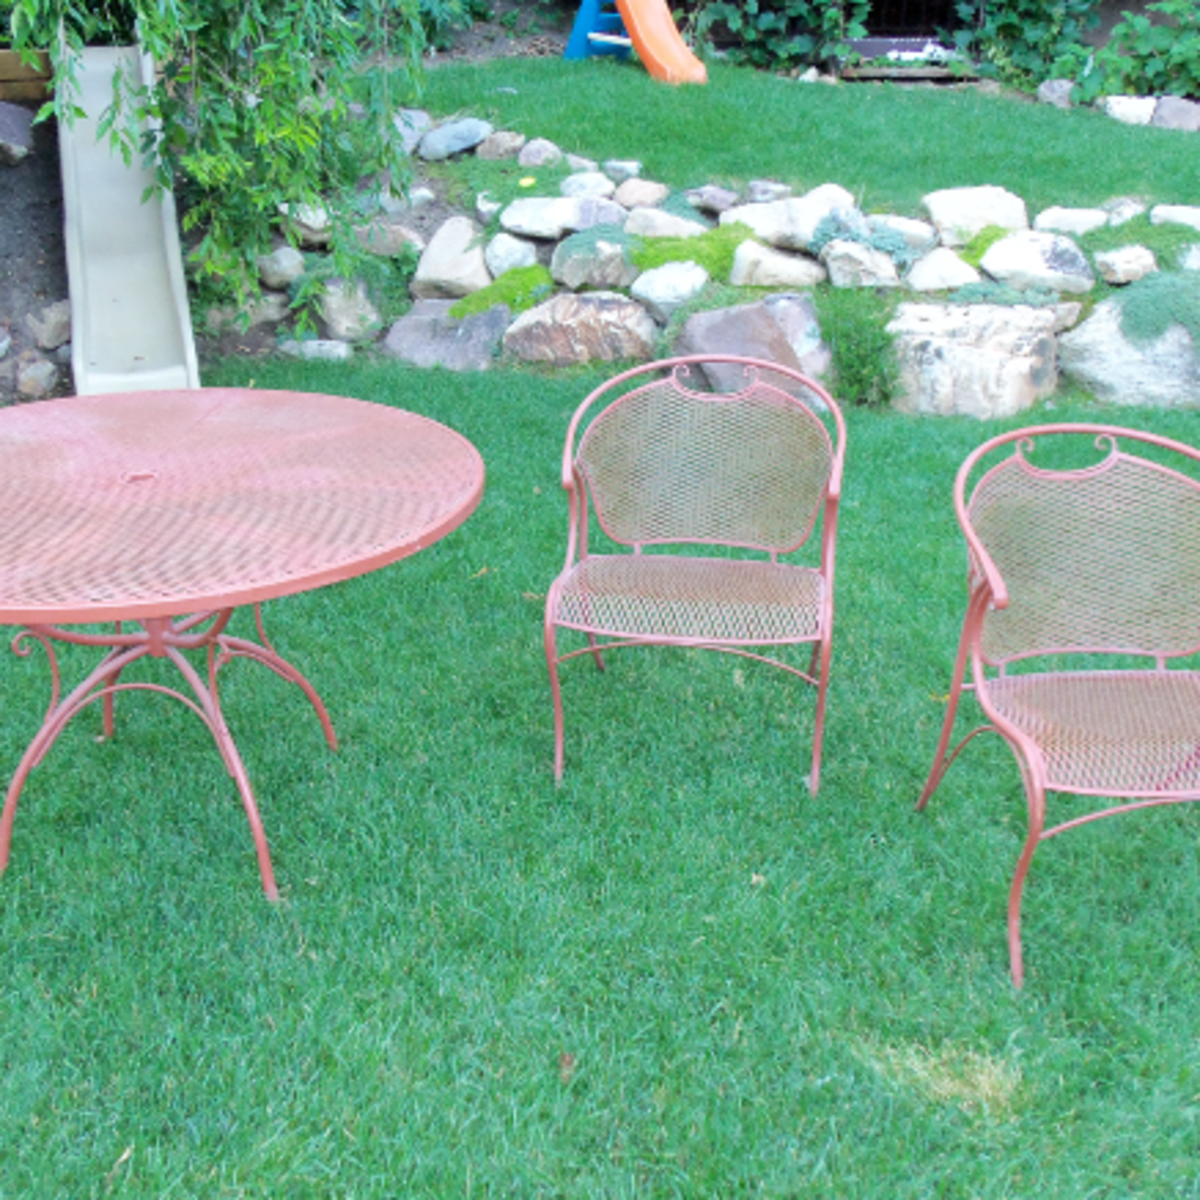 Spray Painting Wrought Iron Furniture, How Do You Paint Wrought Iron Garden Furniture